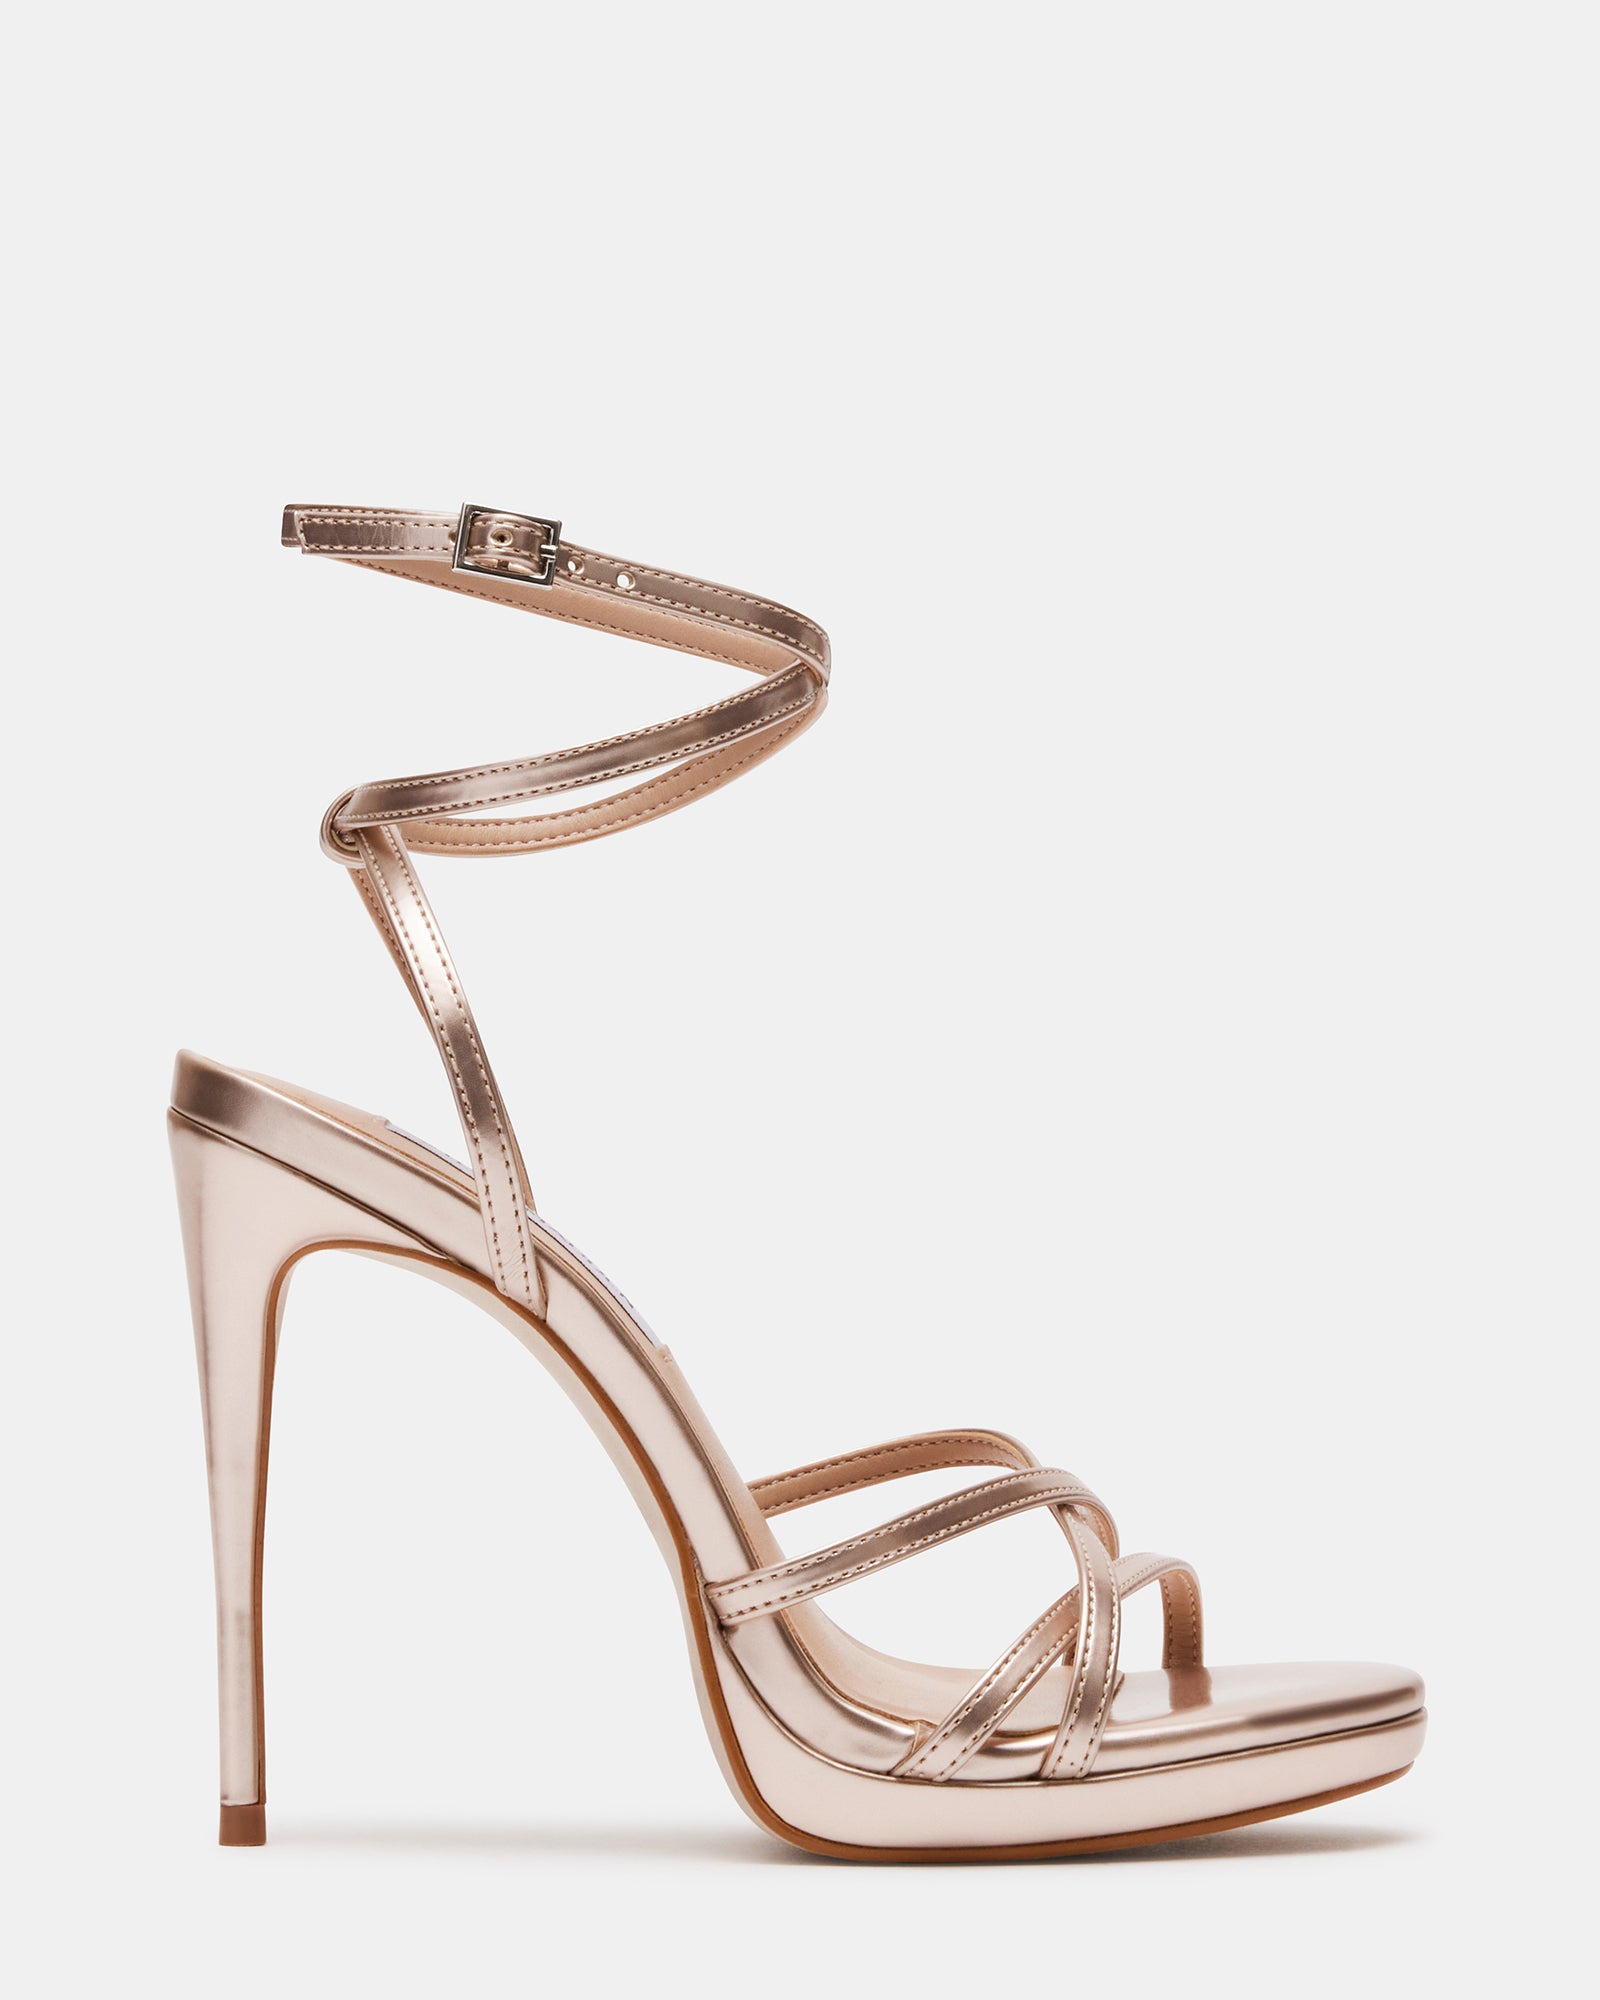 Strappy high-heeled sandals in gold metallic leather . PURA LOPEZ